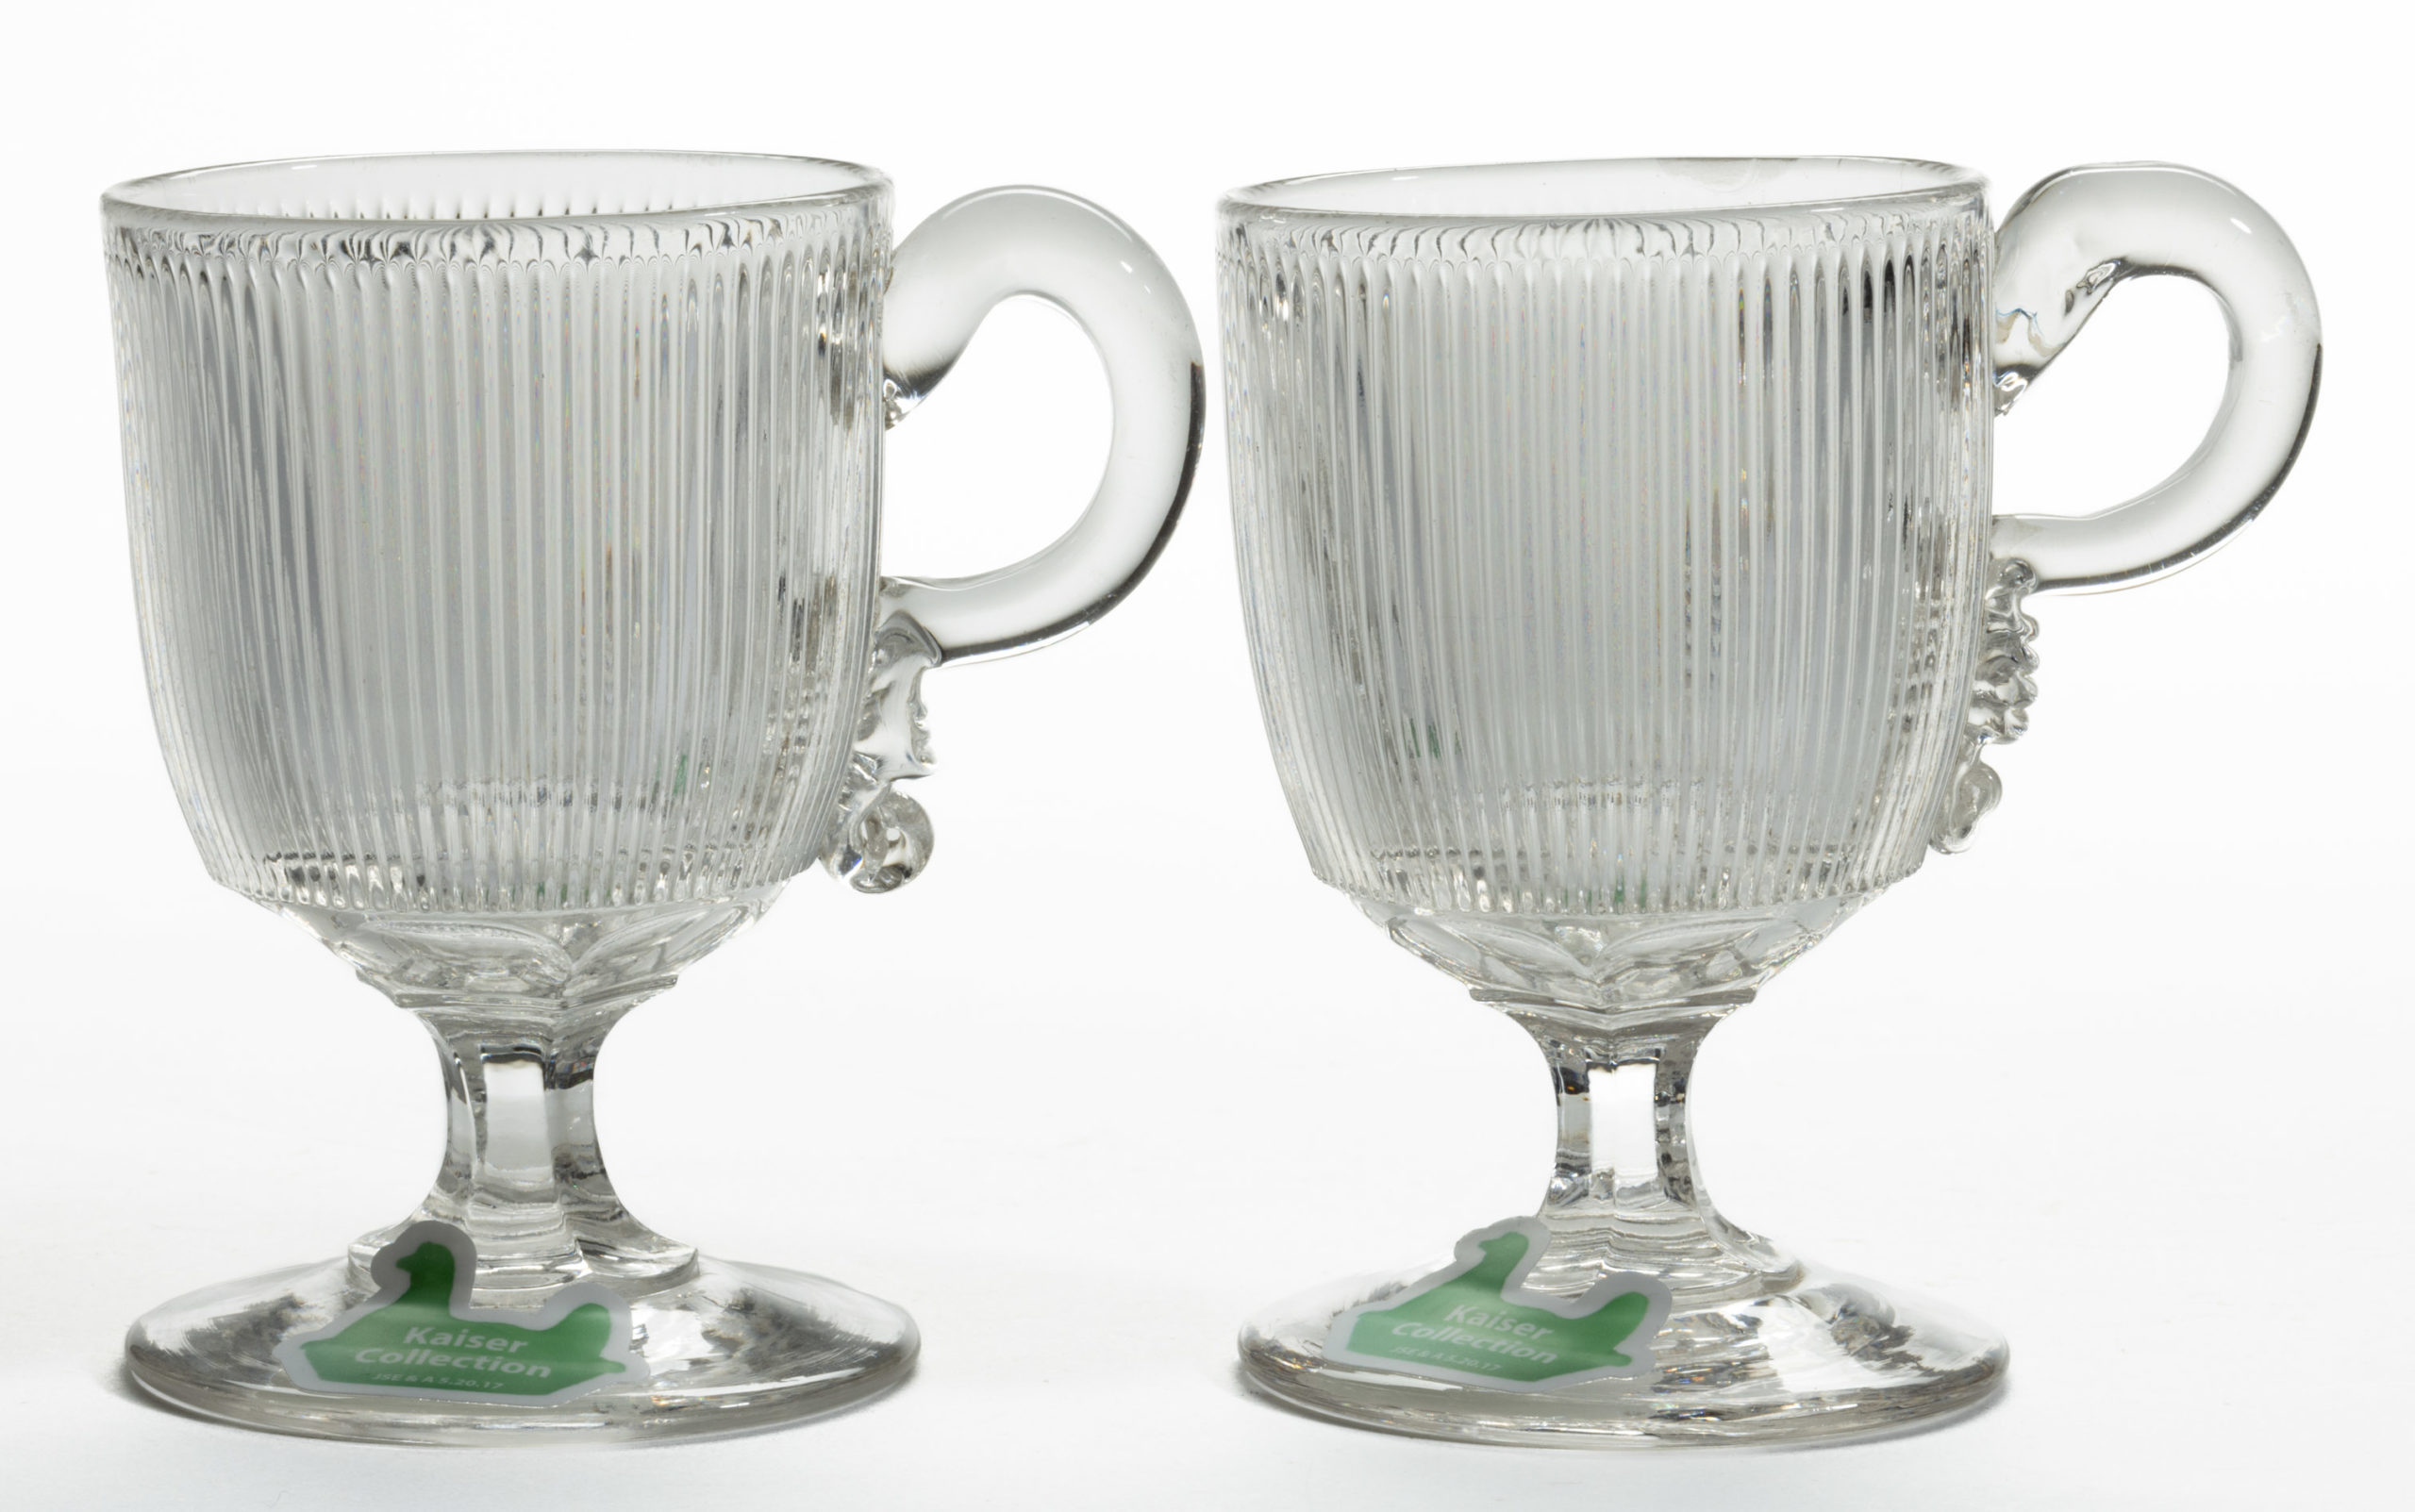 FINE RIB / REEDED (OMN) HANDLED CUSTARDS / EGG CUPS, LOT OF TWO,